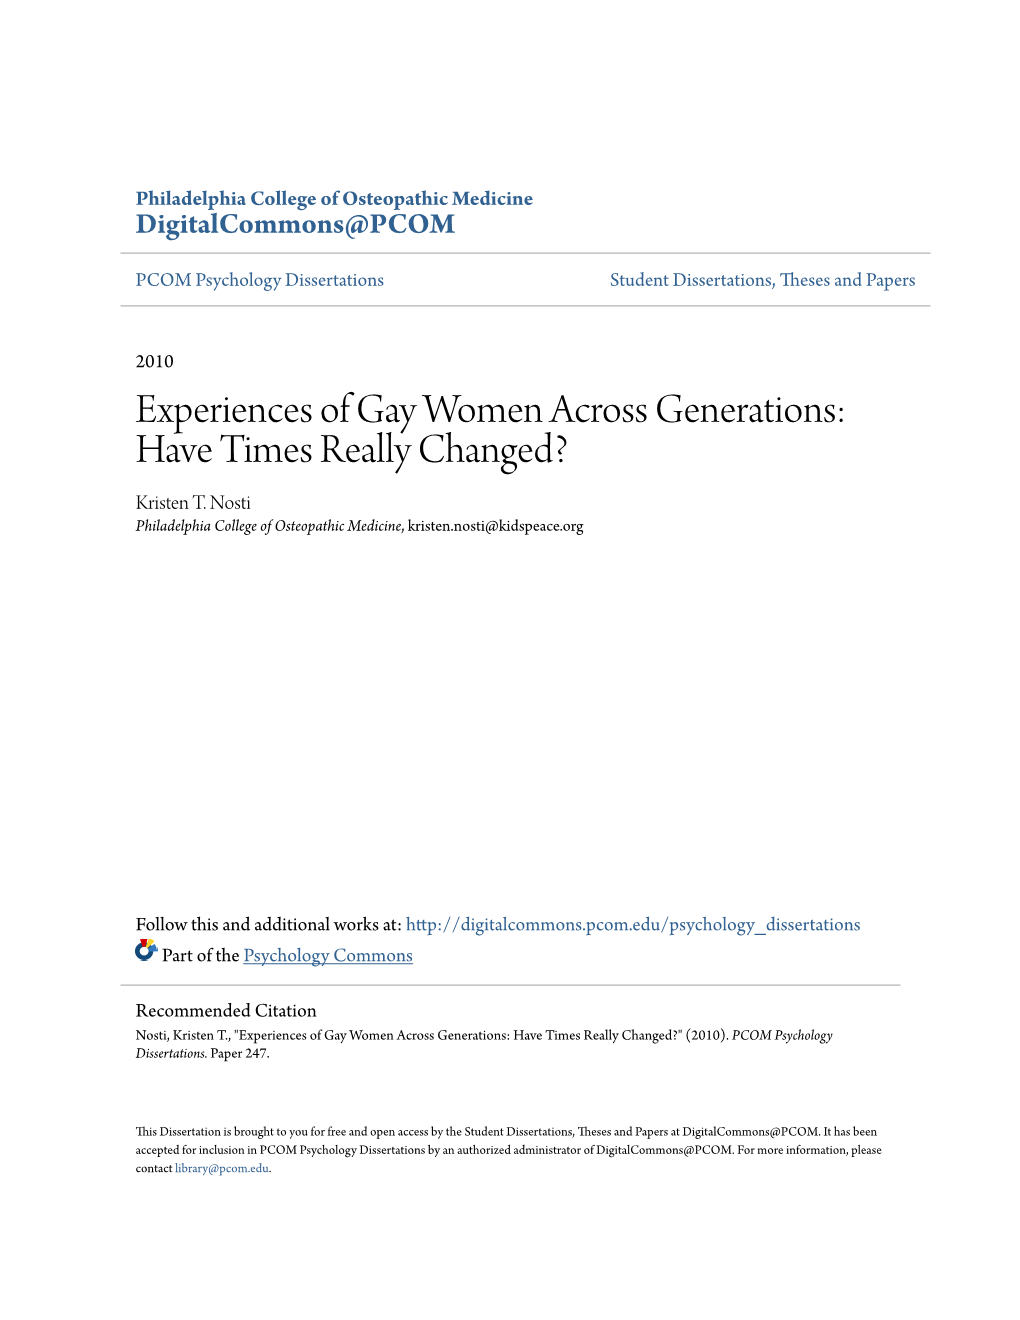 Experiences of Gay Women Across Generations: Have Times Really Changed? Kristen T